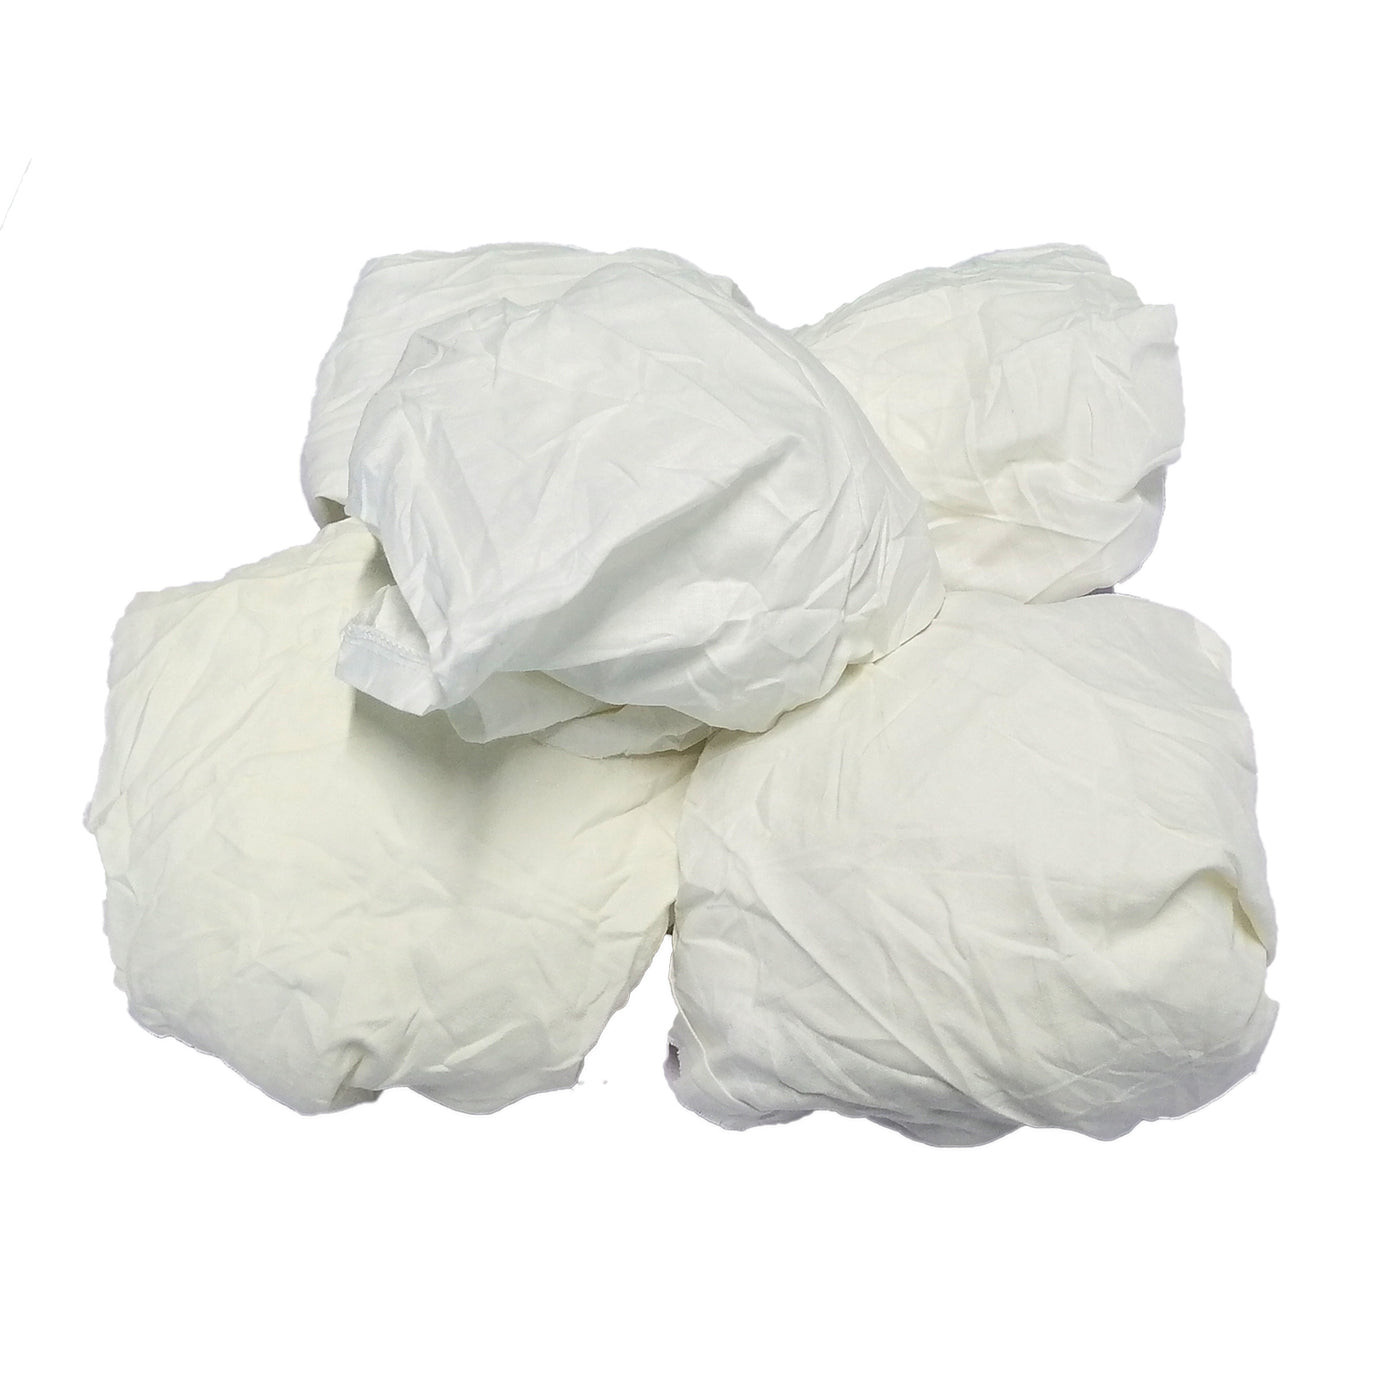 White Heavy Duty Cotton Rags - 50 lbs Box , Affordable Wipers